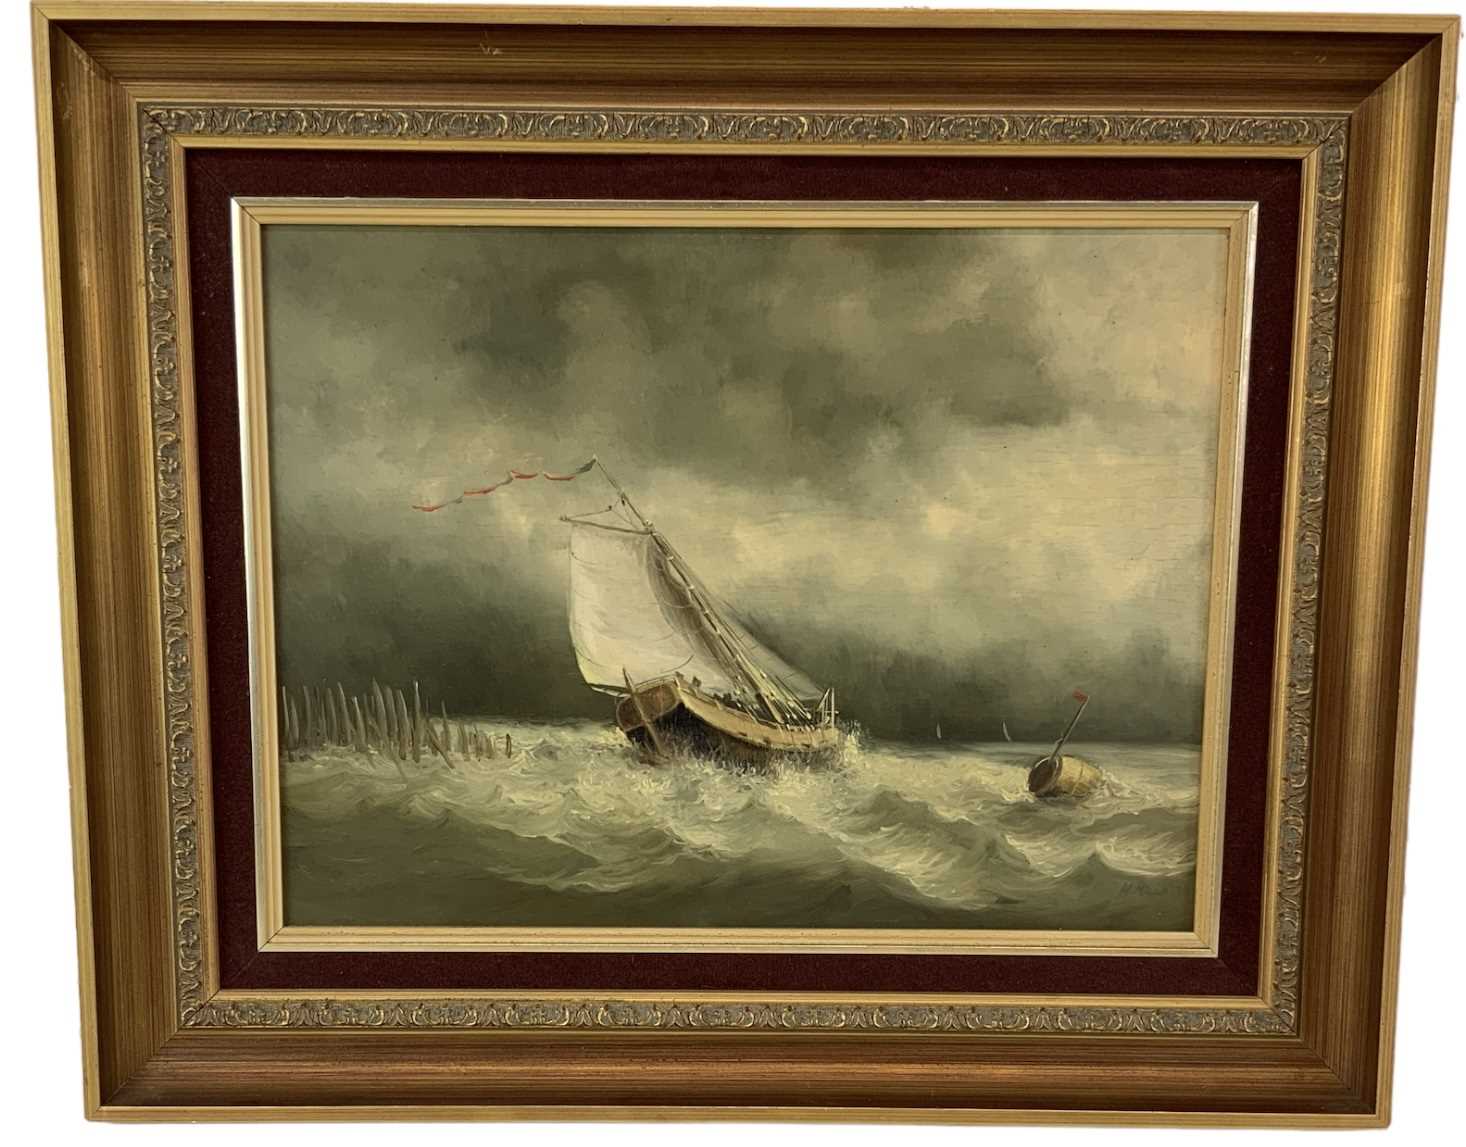 H MILLS; oil on canvas, shipping scene depicting a boat on stormy seas, signed lower right, 30 x